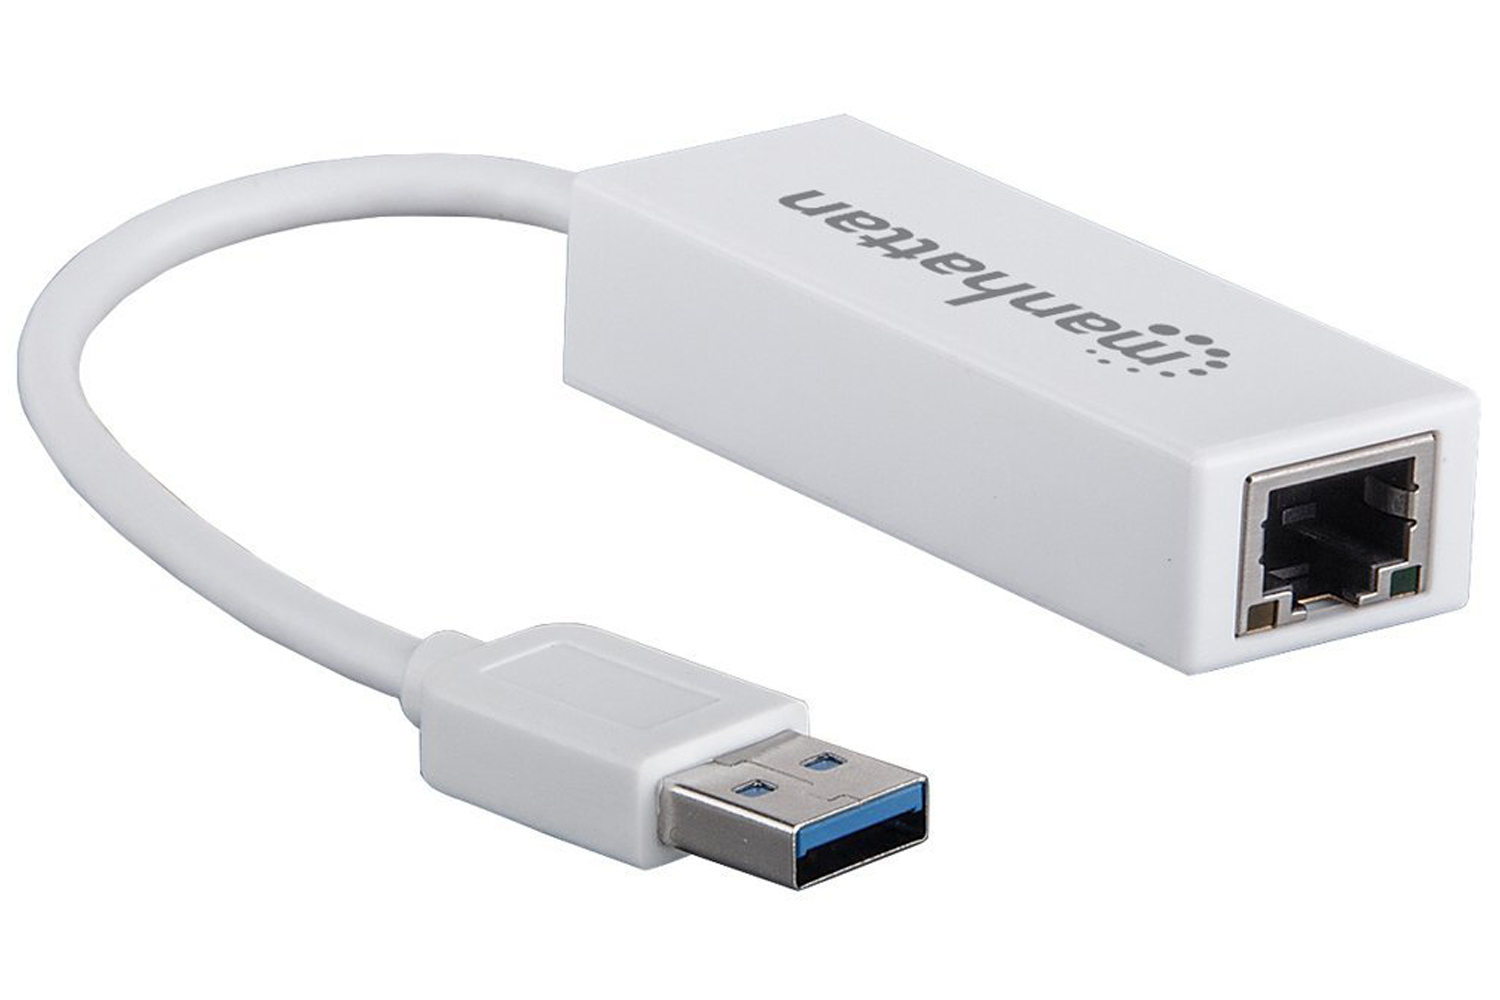 lan7500 usb 2.0 to ethernet adapter driver